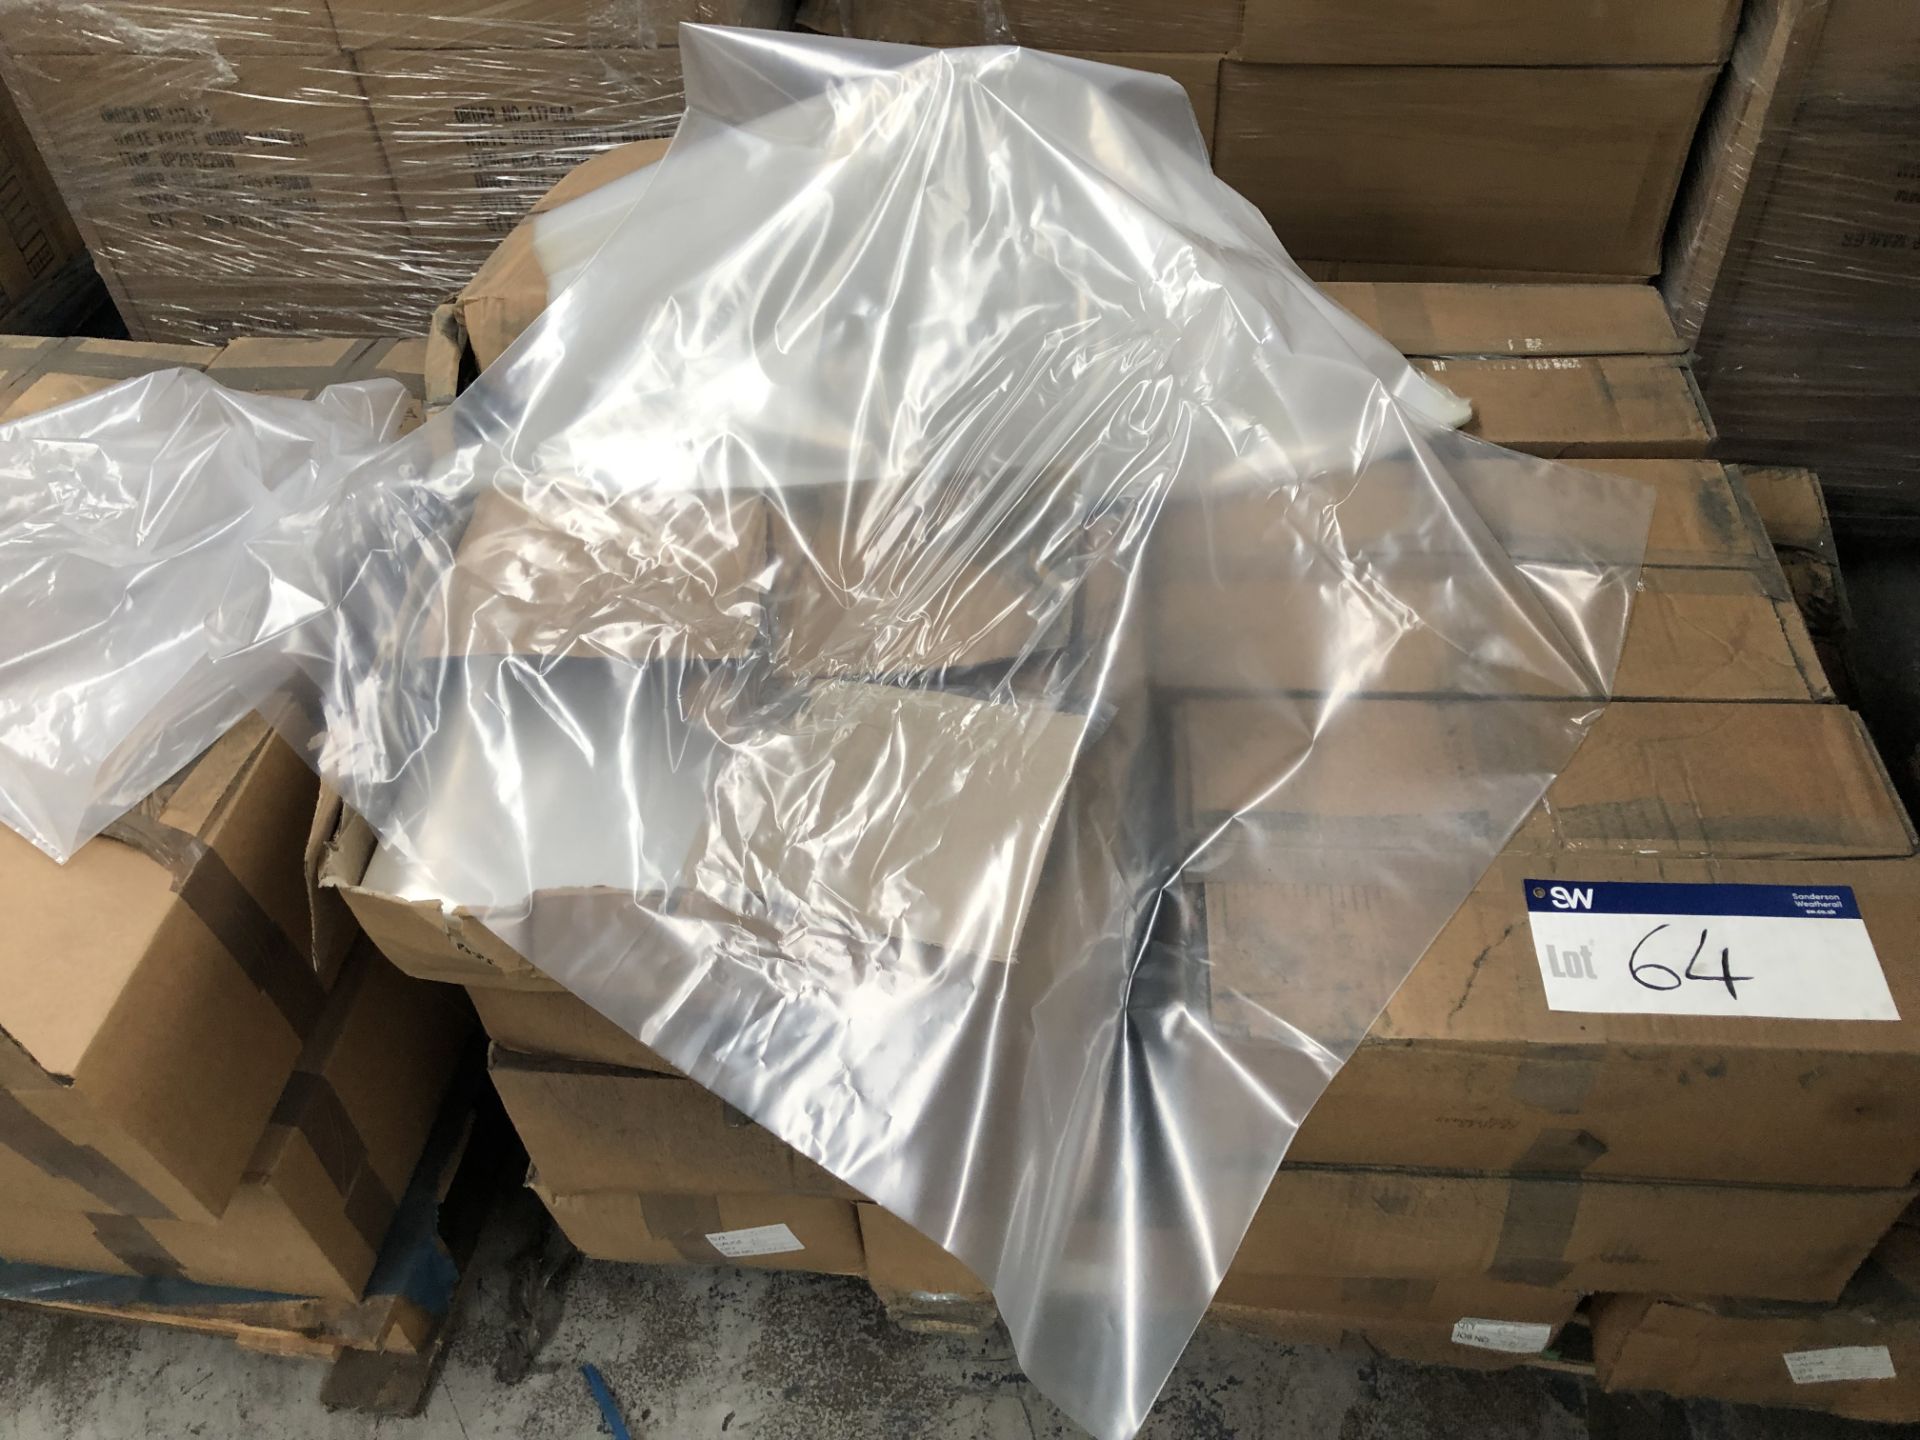 Approx. ½ Pallet of Polythene Packaging, box quant